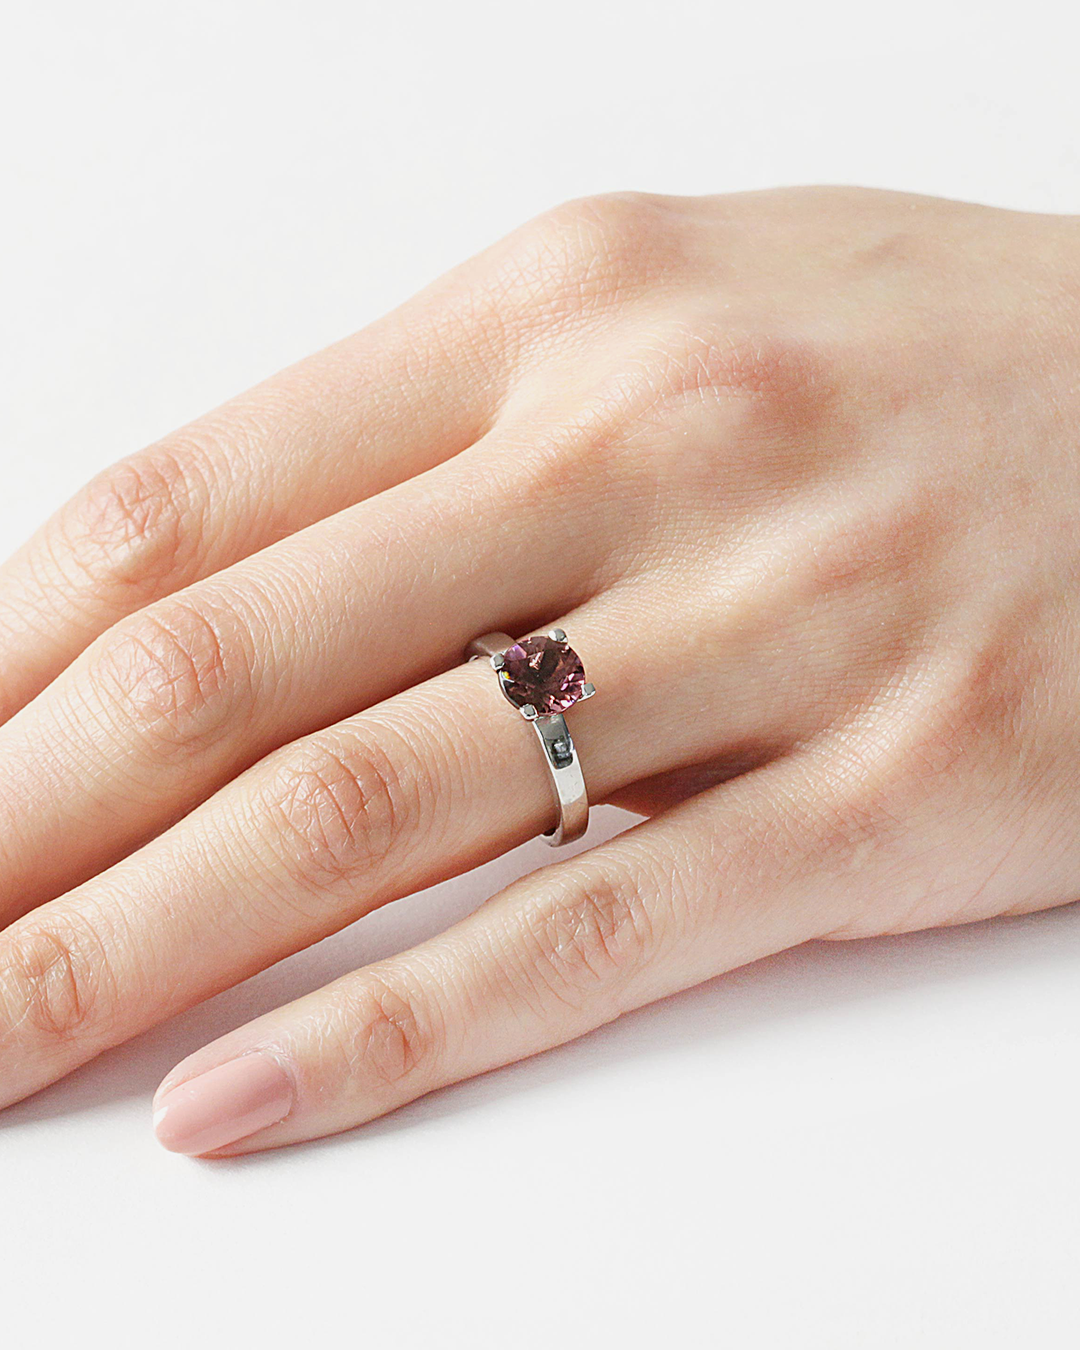 Orbit / PO Pink Tourmaline By fitzgerald jewelry in Engagement Rings Category